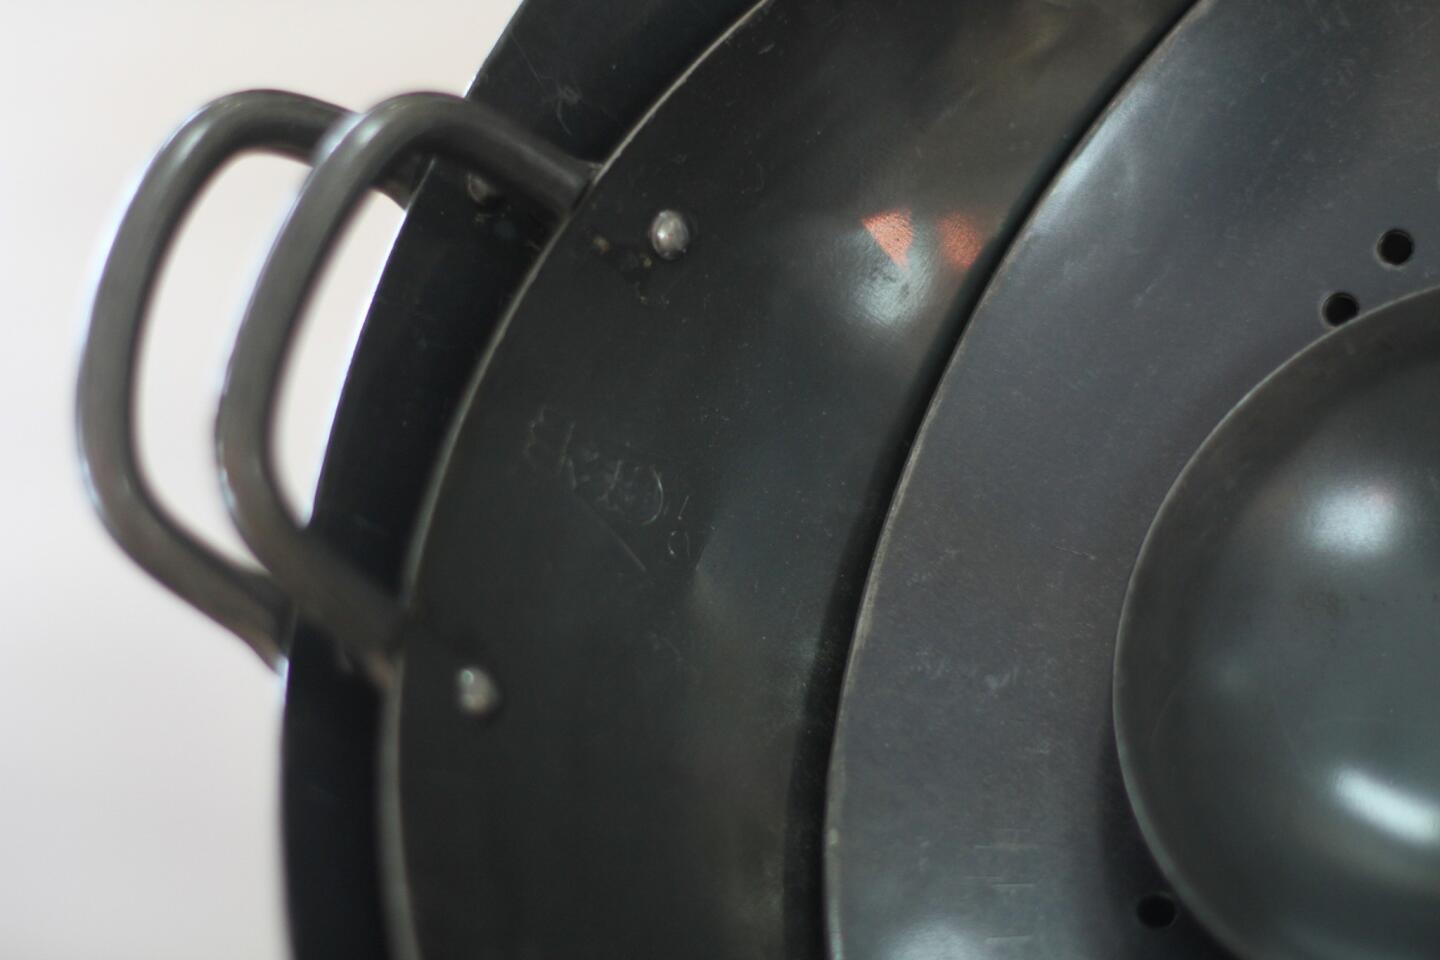 Japanese Wok from Hitachiya These steel woks, hand-hammered in Yokohama, heat up fast, have a silky finish and clean up well too. $58 to $102 at Hitachiya, Rolling Hills Plaza, 2509 W. Pacific Coast Highway, Torrance, (310) 534-3136, http://www.hitachiya.com